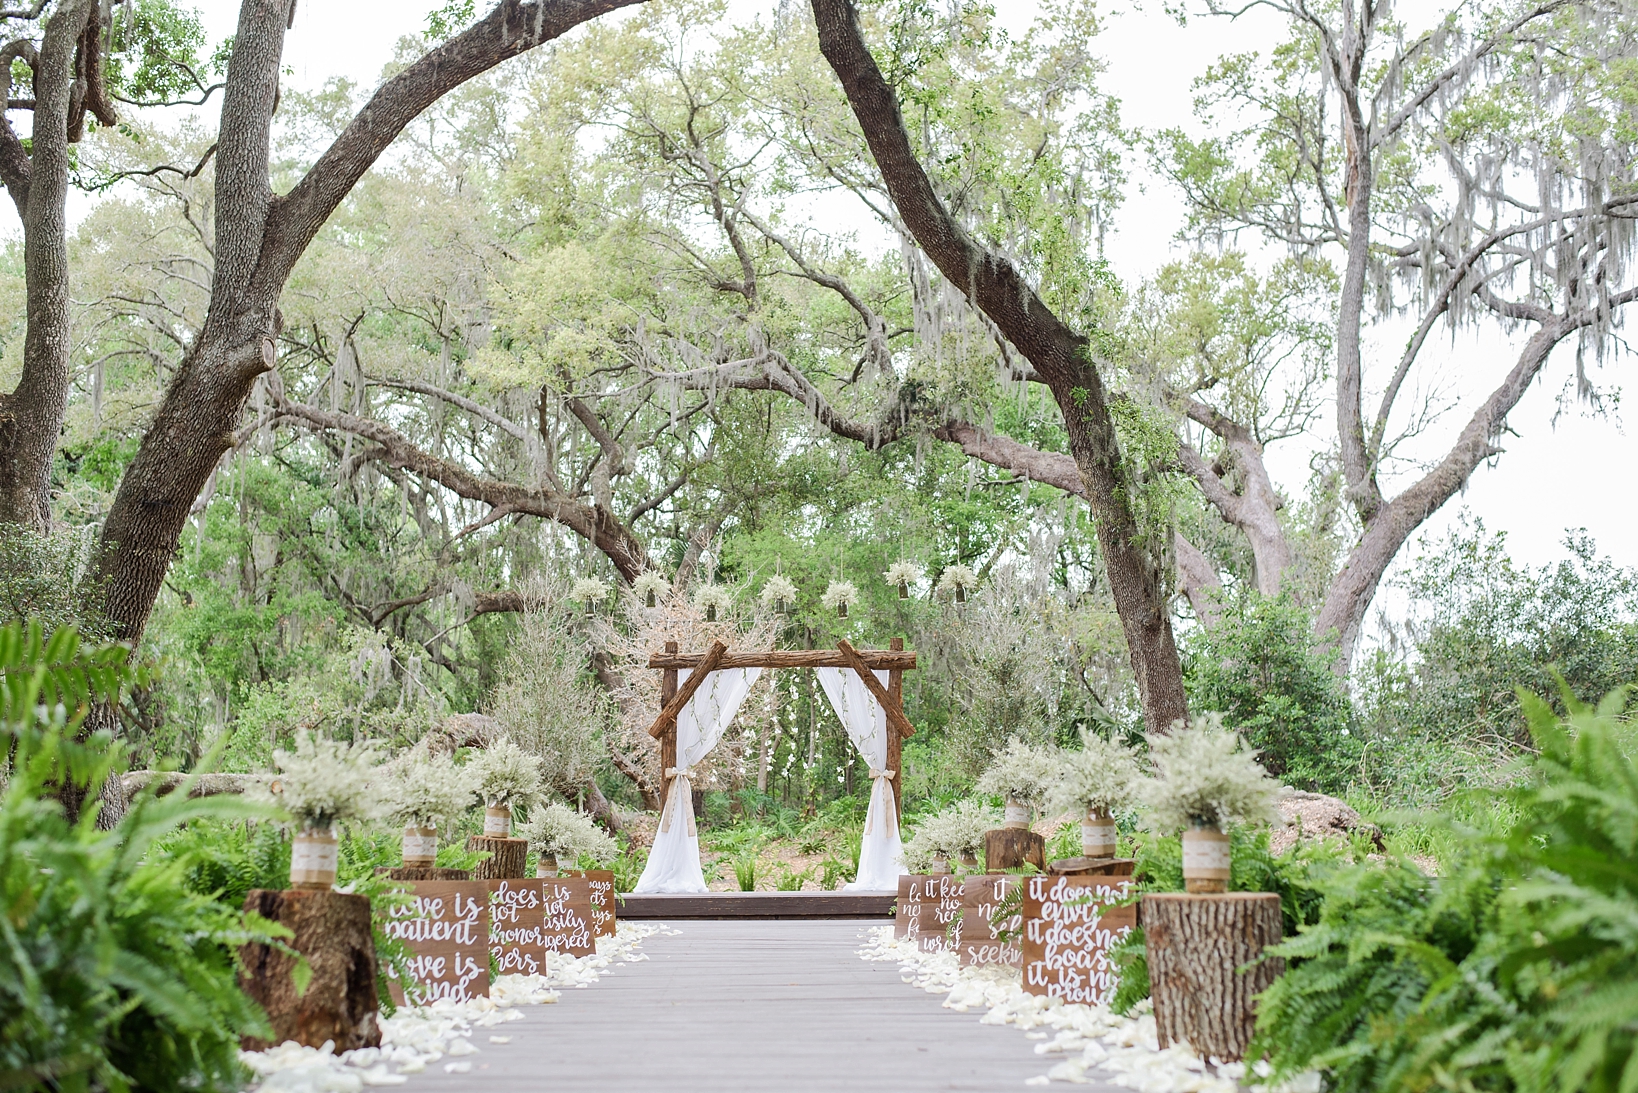 The wedding ceremony in the rustic florida forest